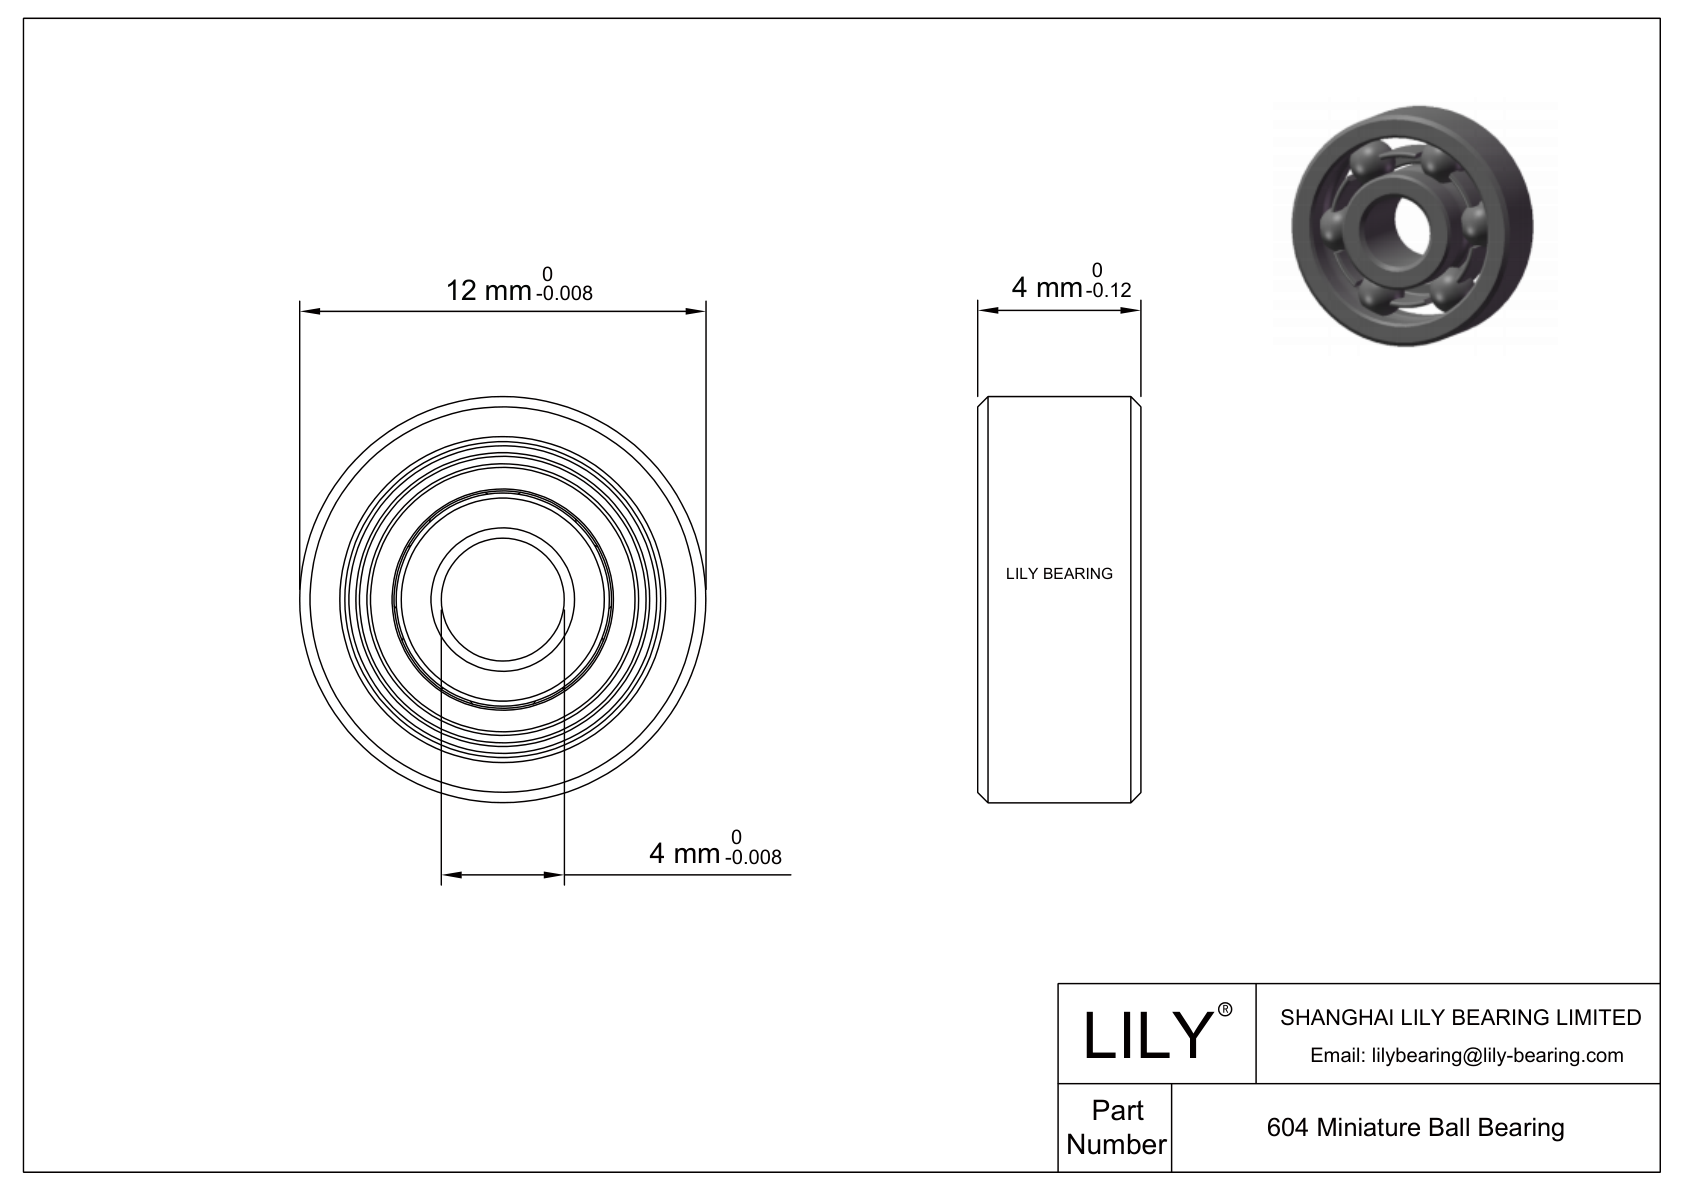 LILY-BS60416-5 POM Coated Bearing cad drawing